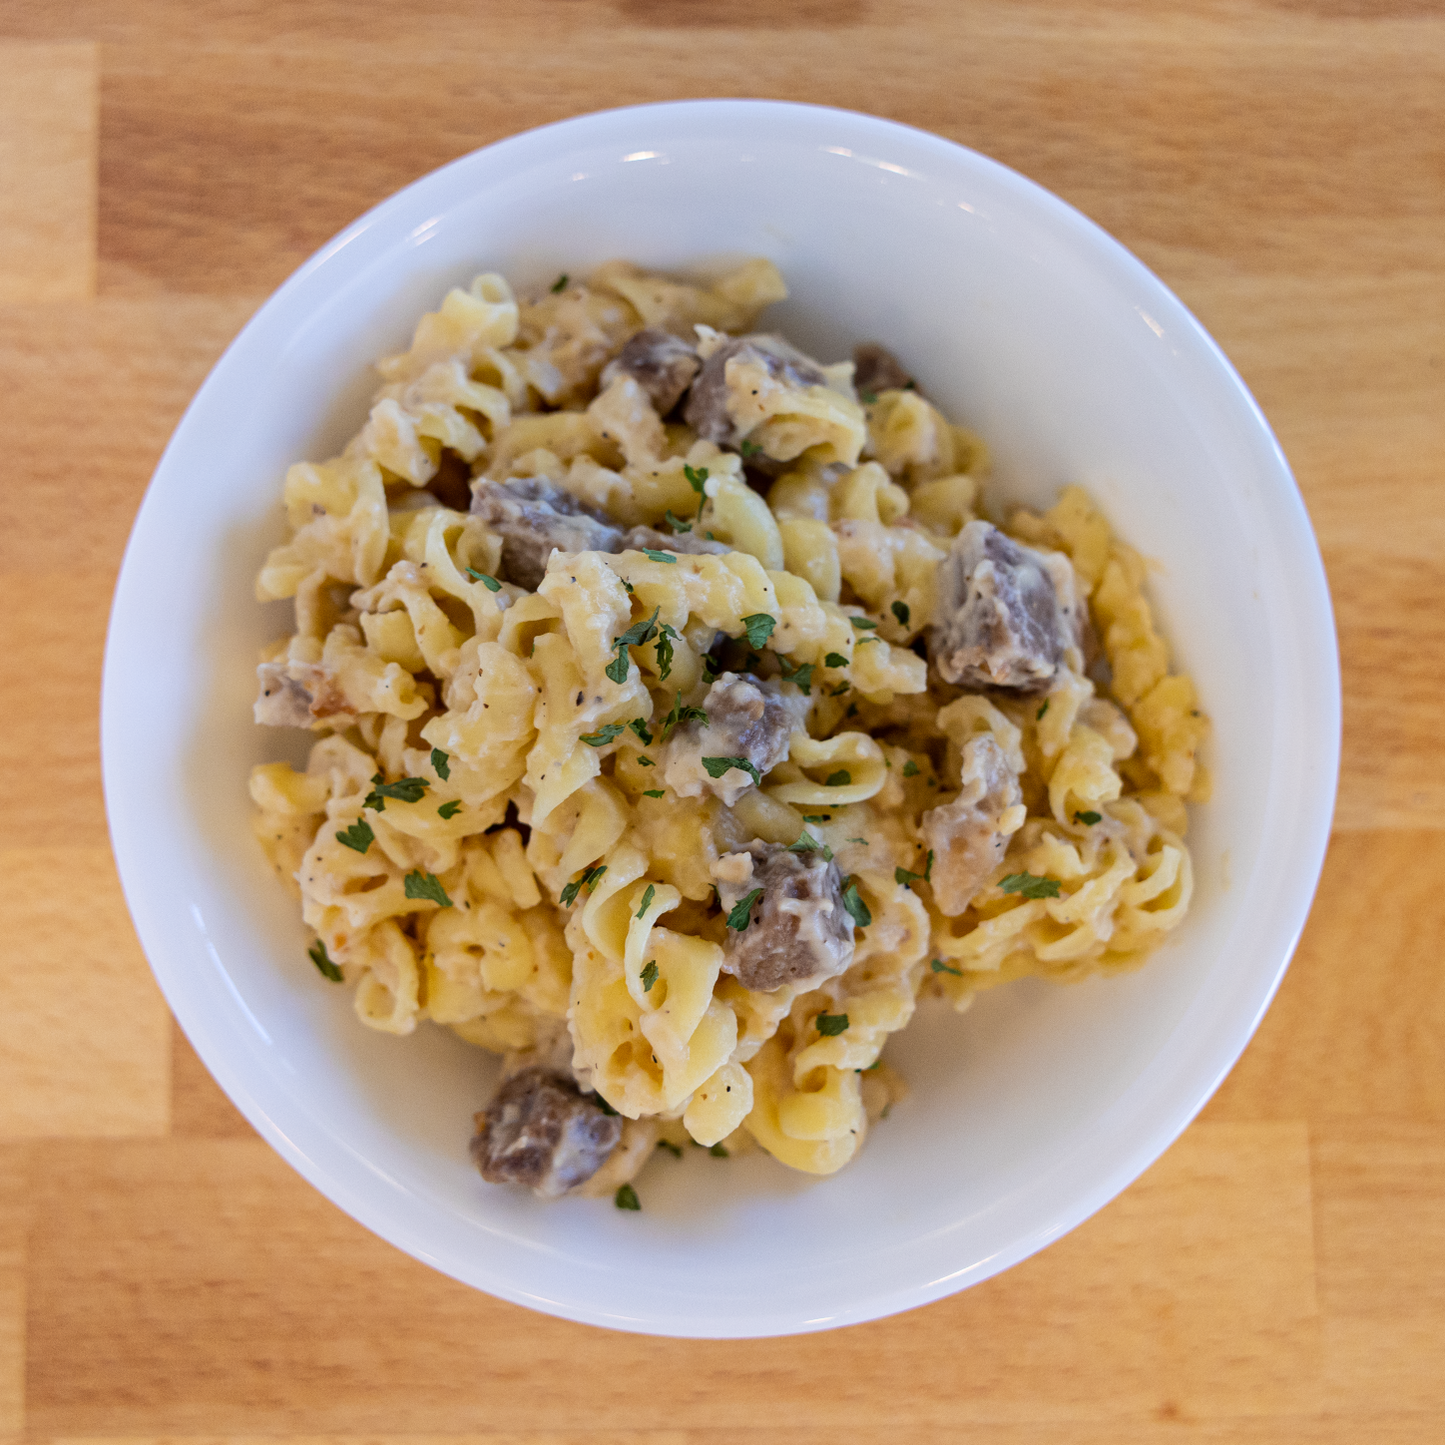 Creamy Pasta and Beef Freeze Dried - #10 Can by Nutristore